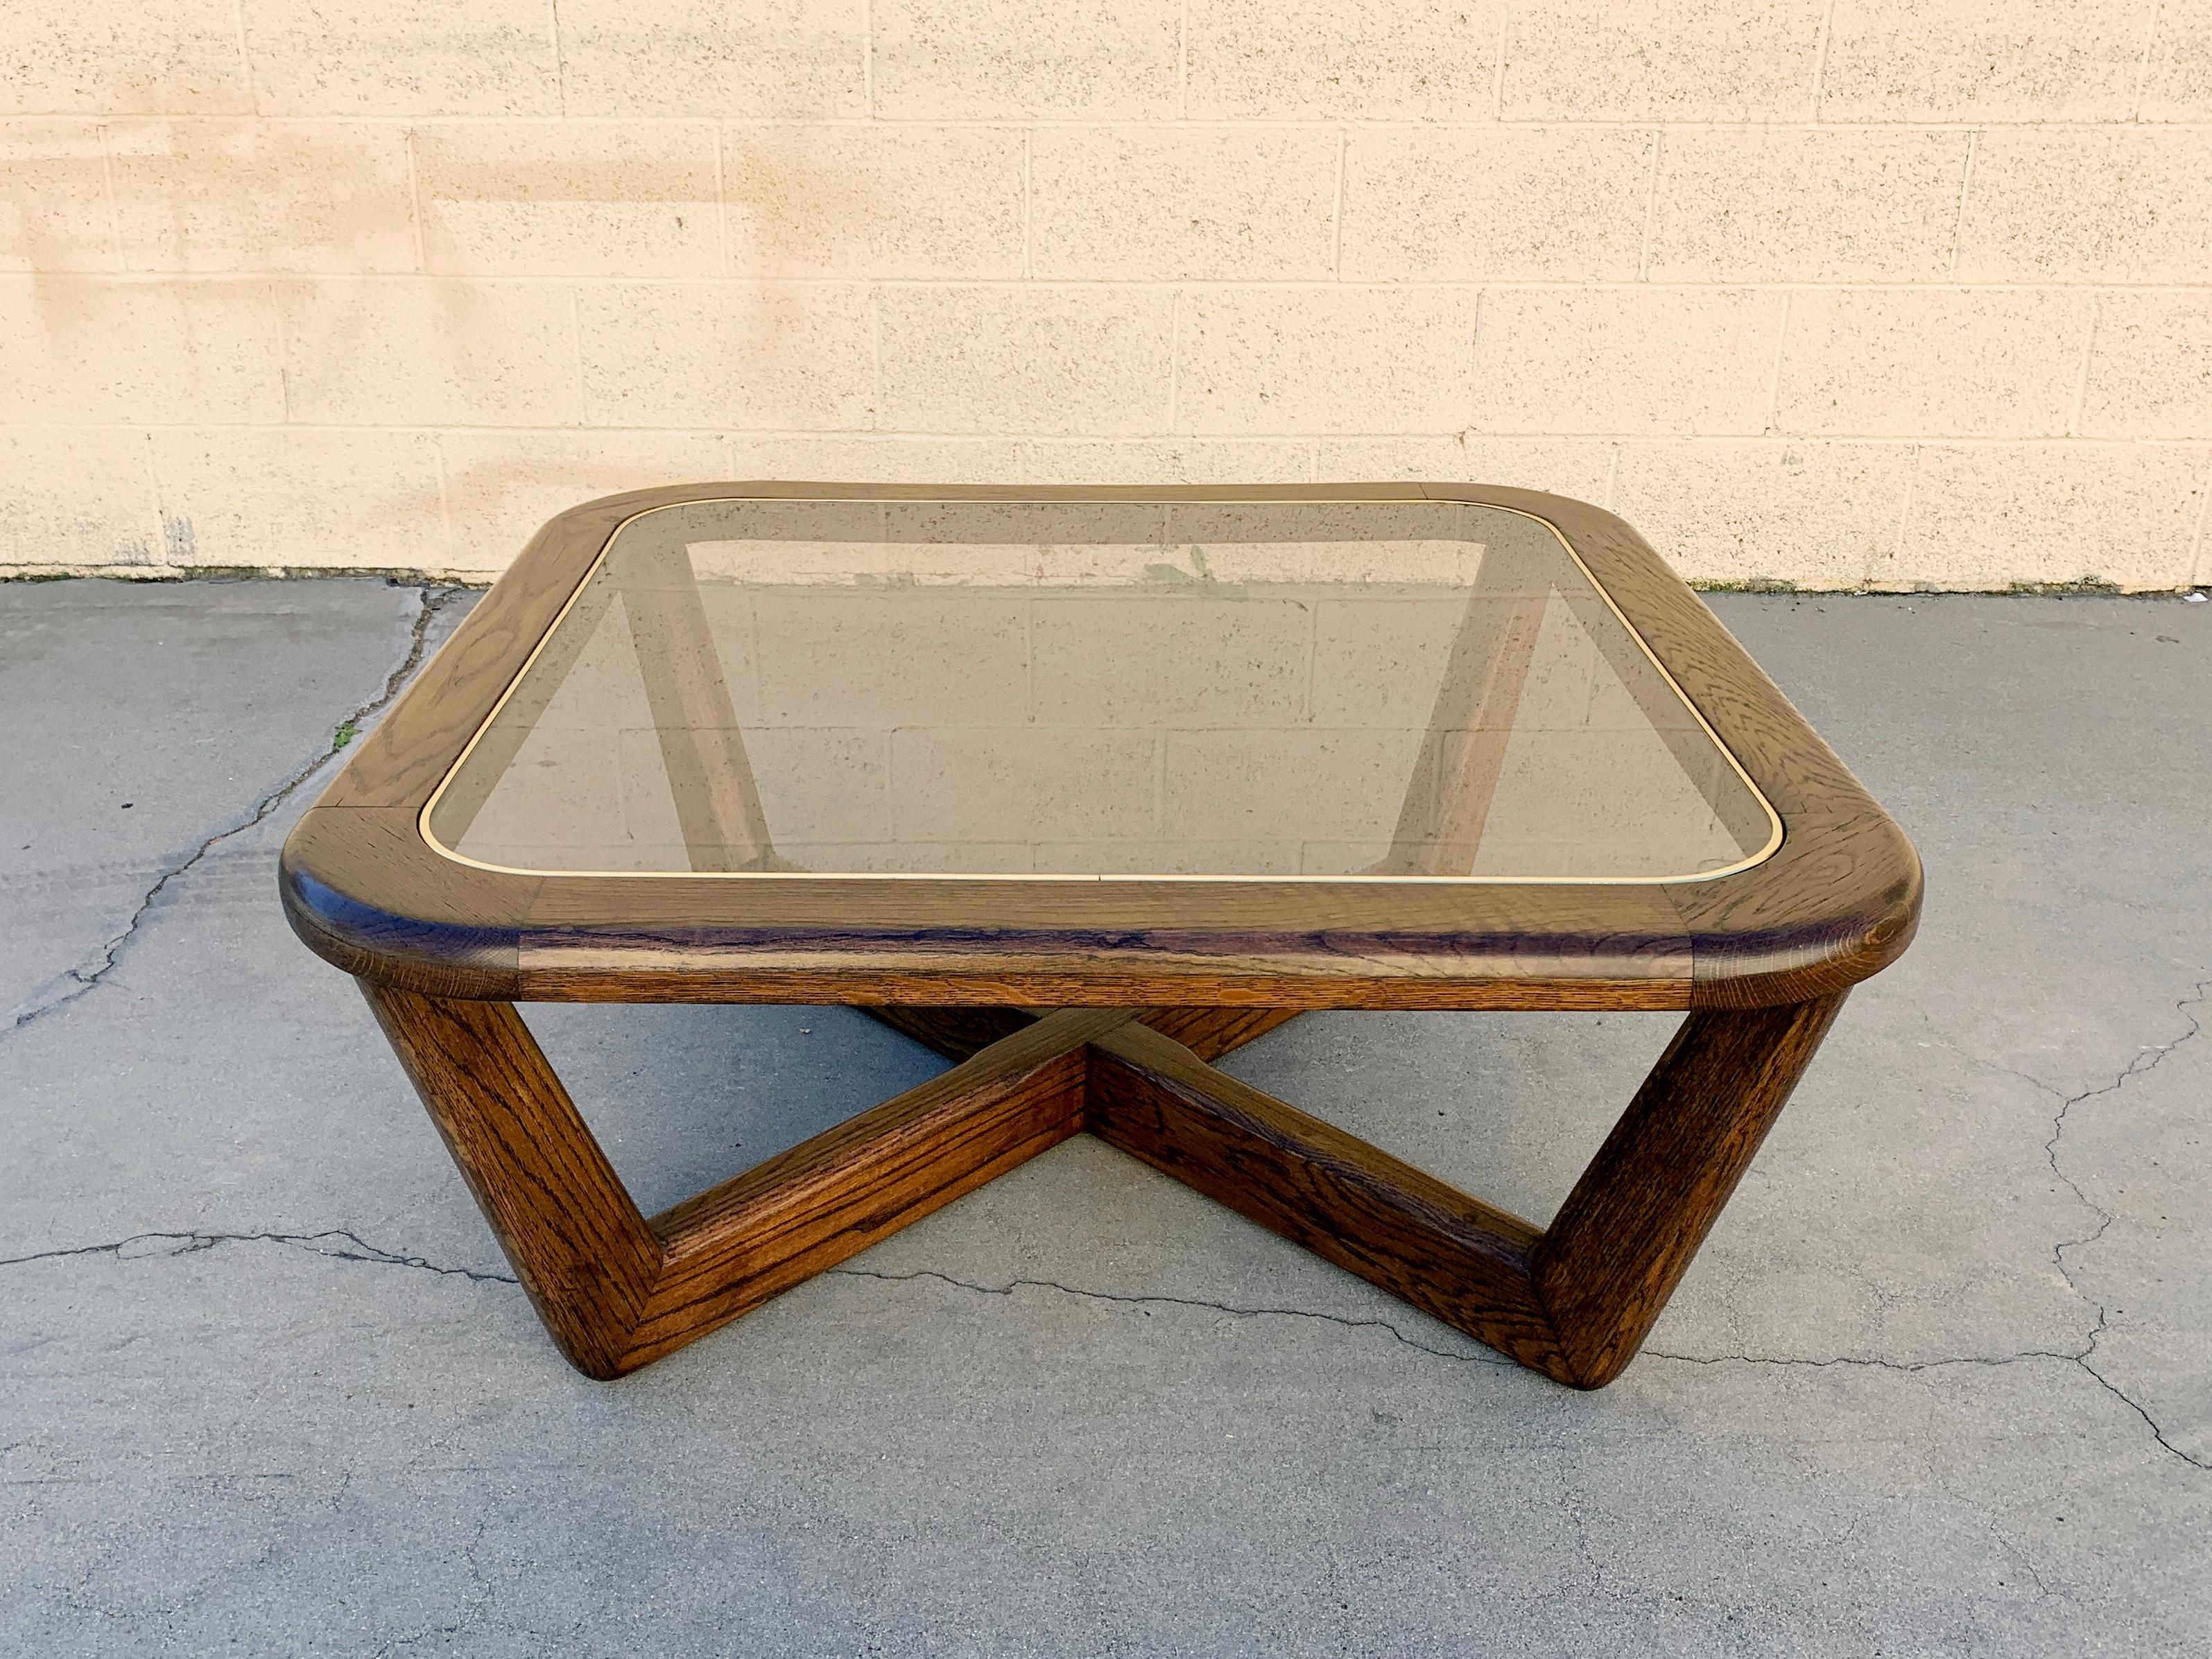 Late 1970s-early 1980s modern coffee table made of solid oak with lacquered walnut stain. Geometric base holds an inlaid glass top with brass coated rubber trim. Great geometric styling. Glass shows some wear; please note some scratches and a